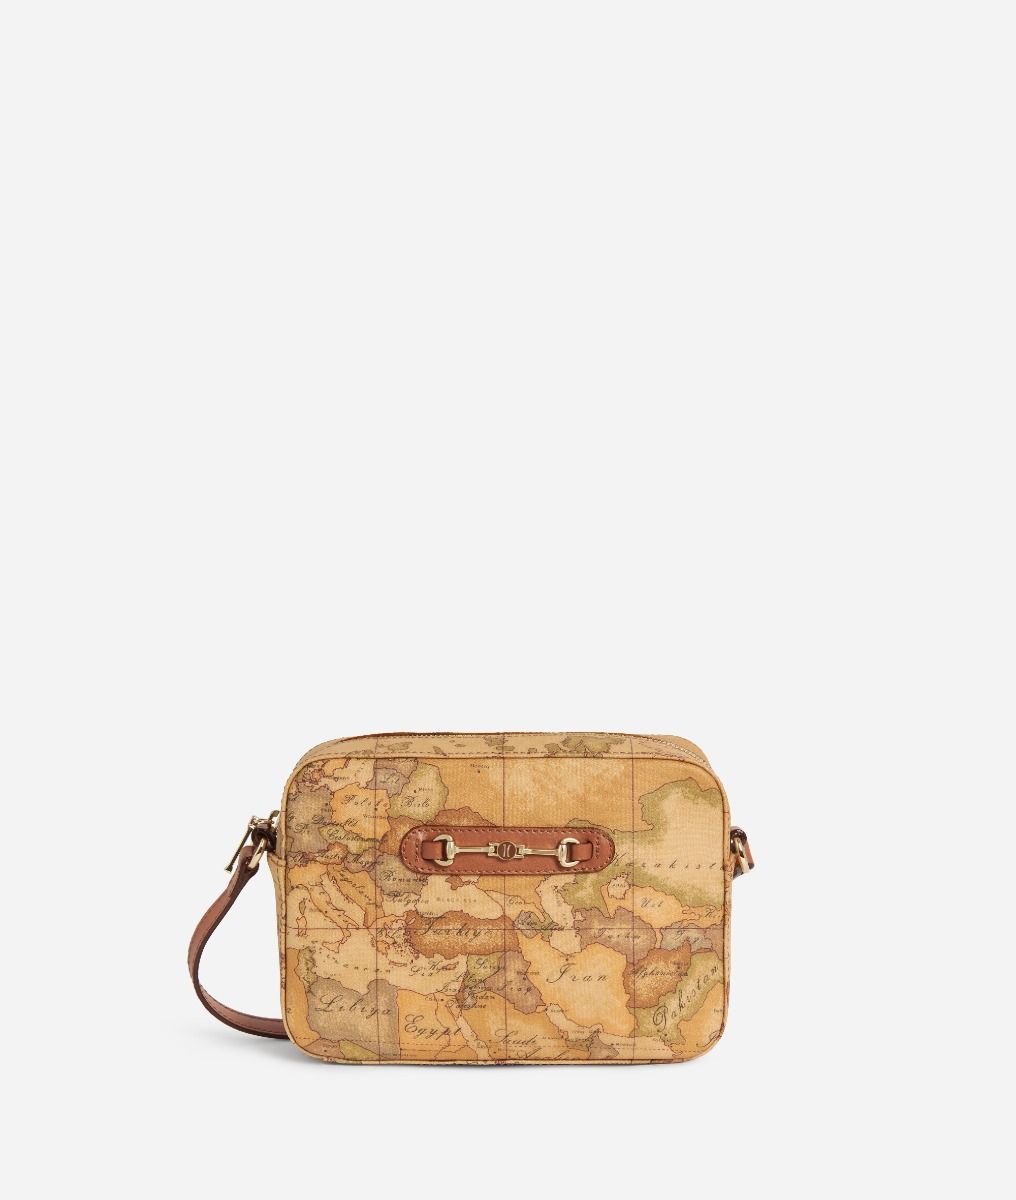 Geo Classic small reporter bag,front